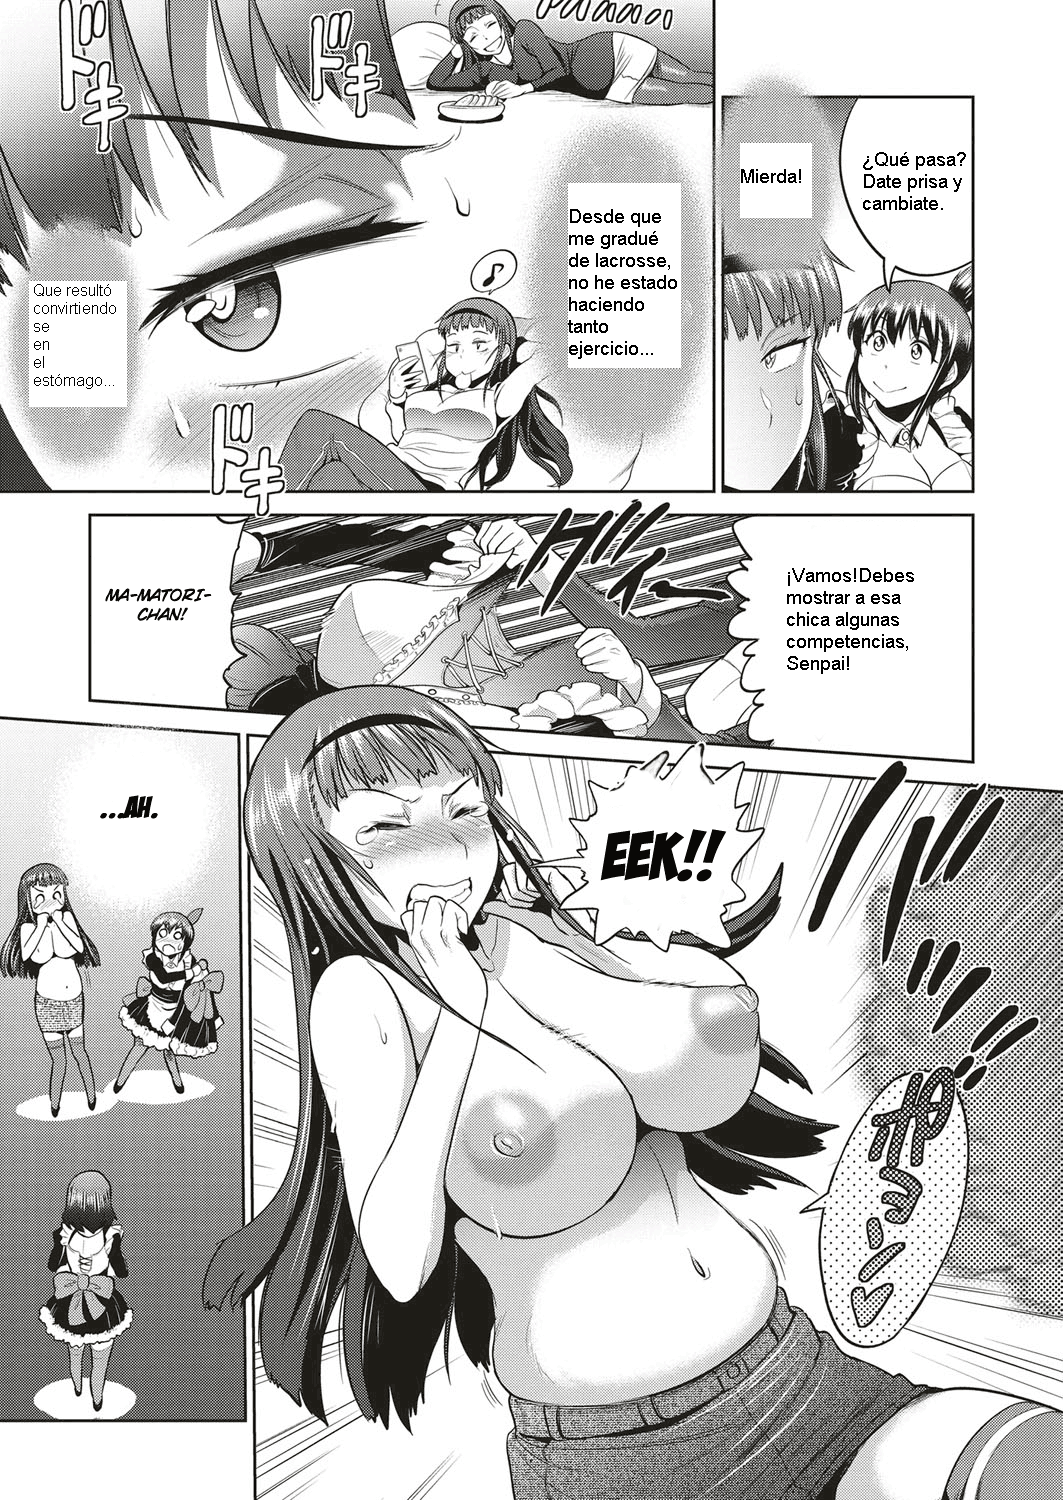 [DISTANCE] Joshi Lacu! - Girls Lacrosse Club ~2 Years Later~ Ch. 4 (COMIC ExE 05) [Spanish] [Digital] [DISTANCE] じょしラク！～2Years Later～ 第4話 (コミック エグゼ 05) [スペイン翻訳] [DL版]